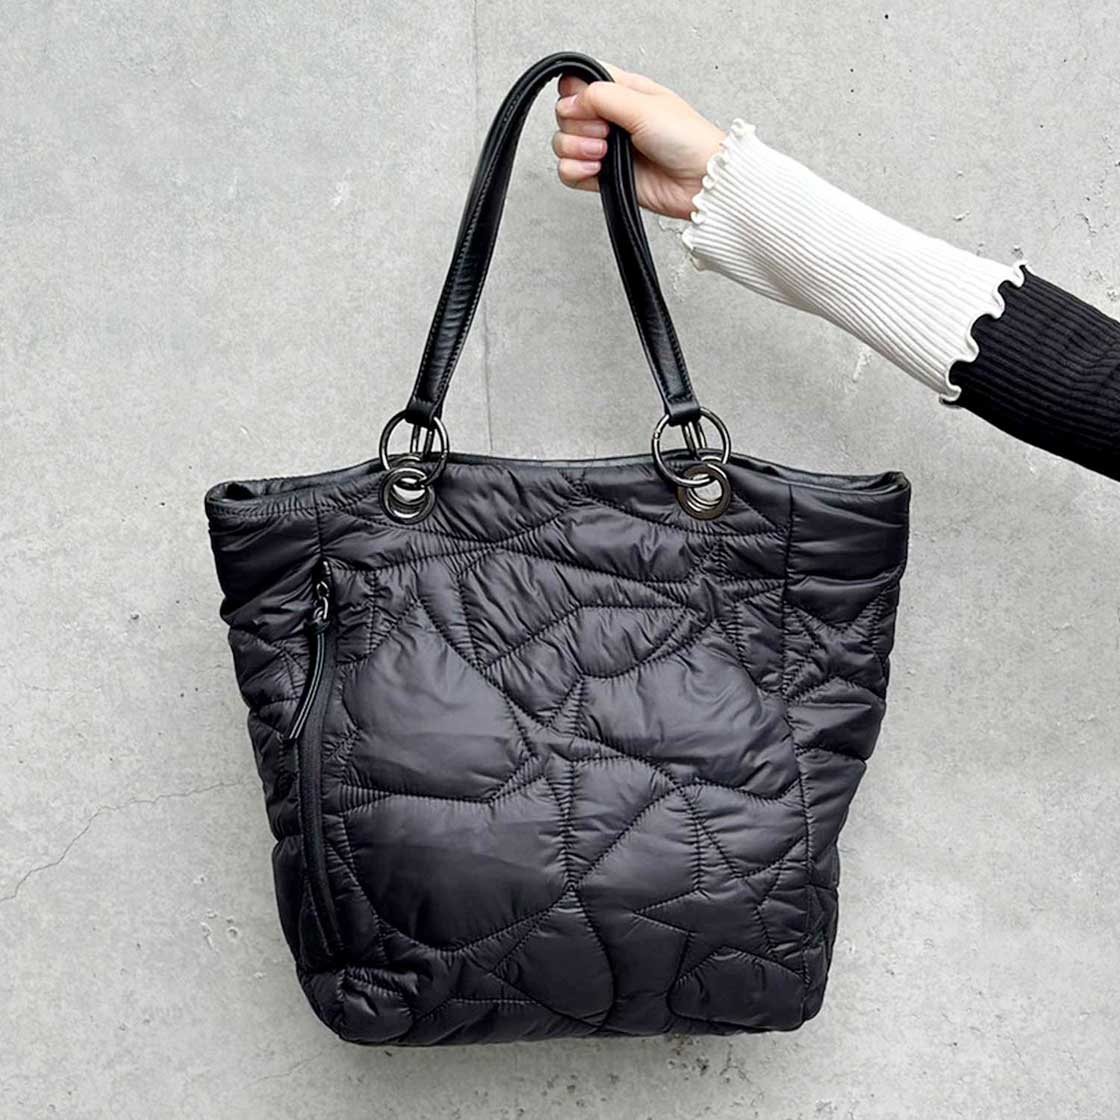 【QUILTED TOTE】ナイロントートバッグ